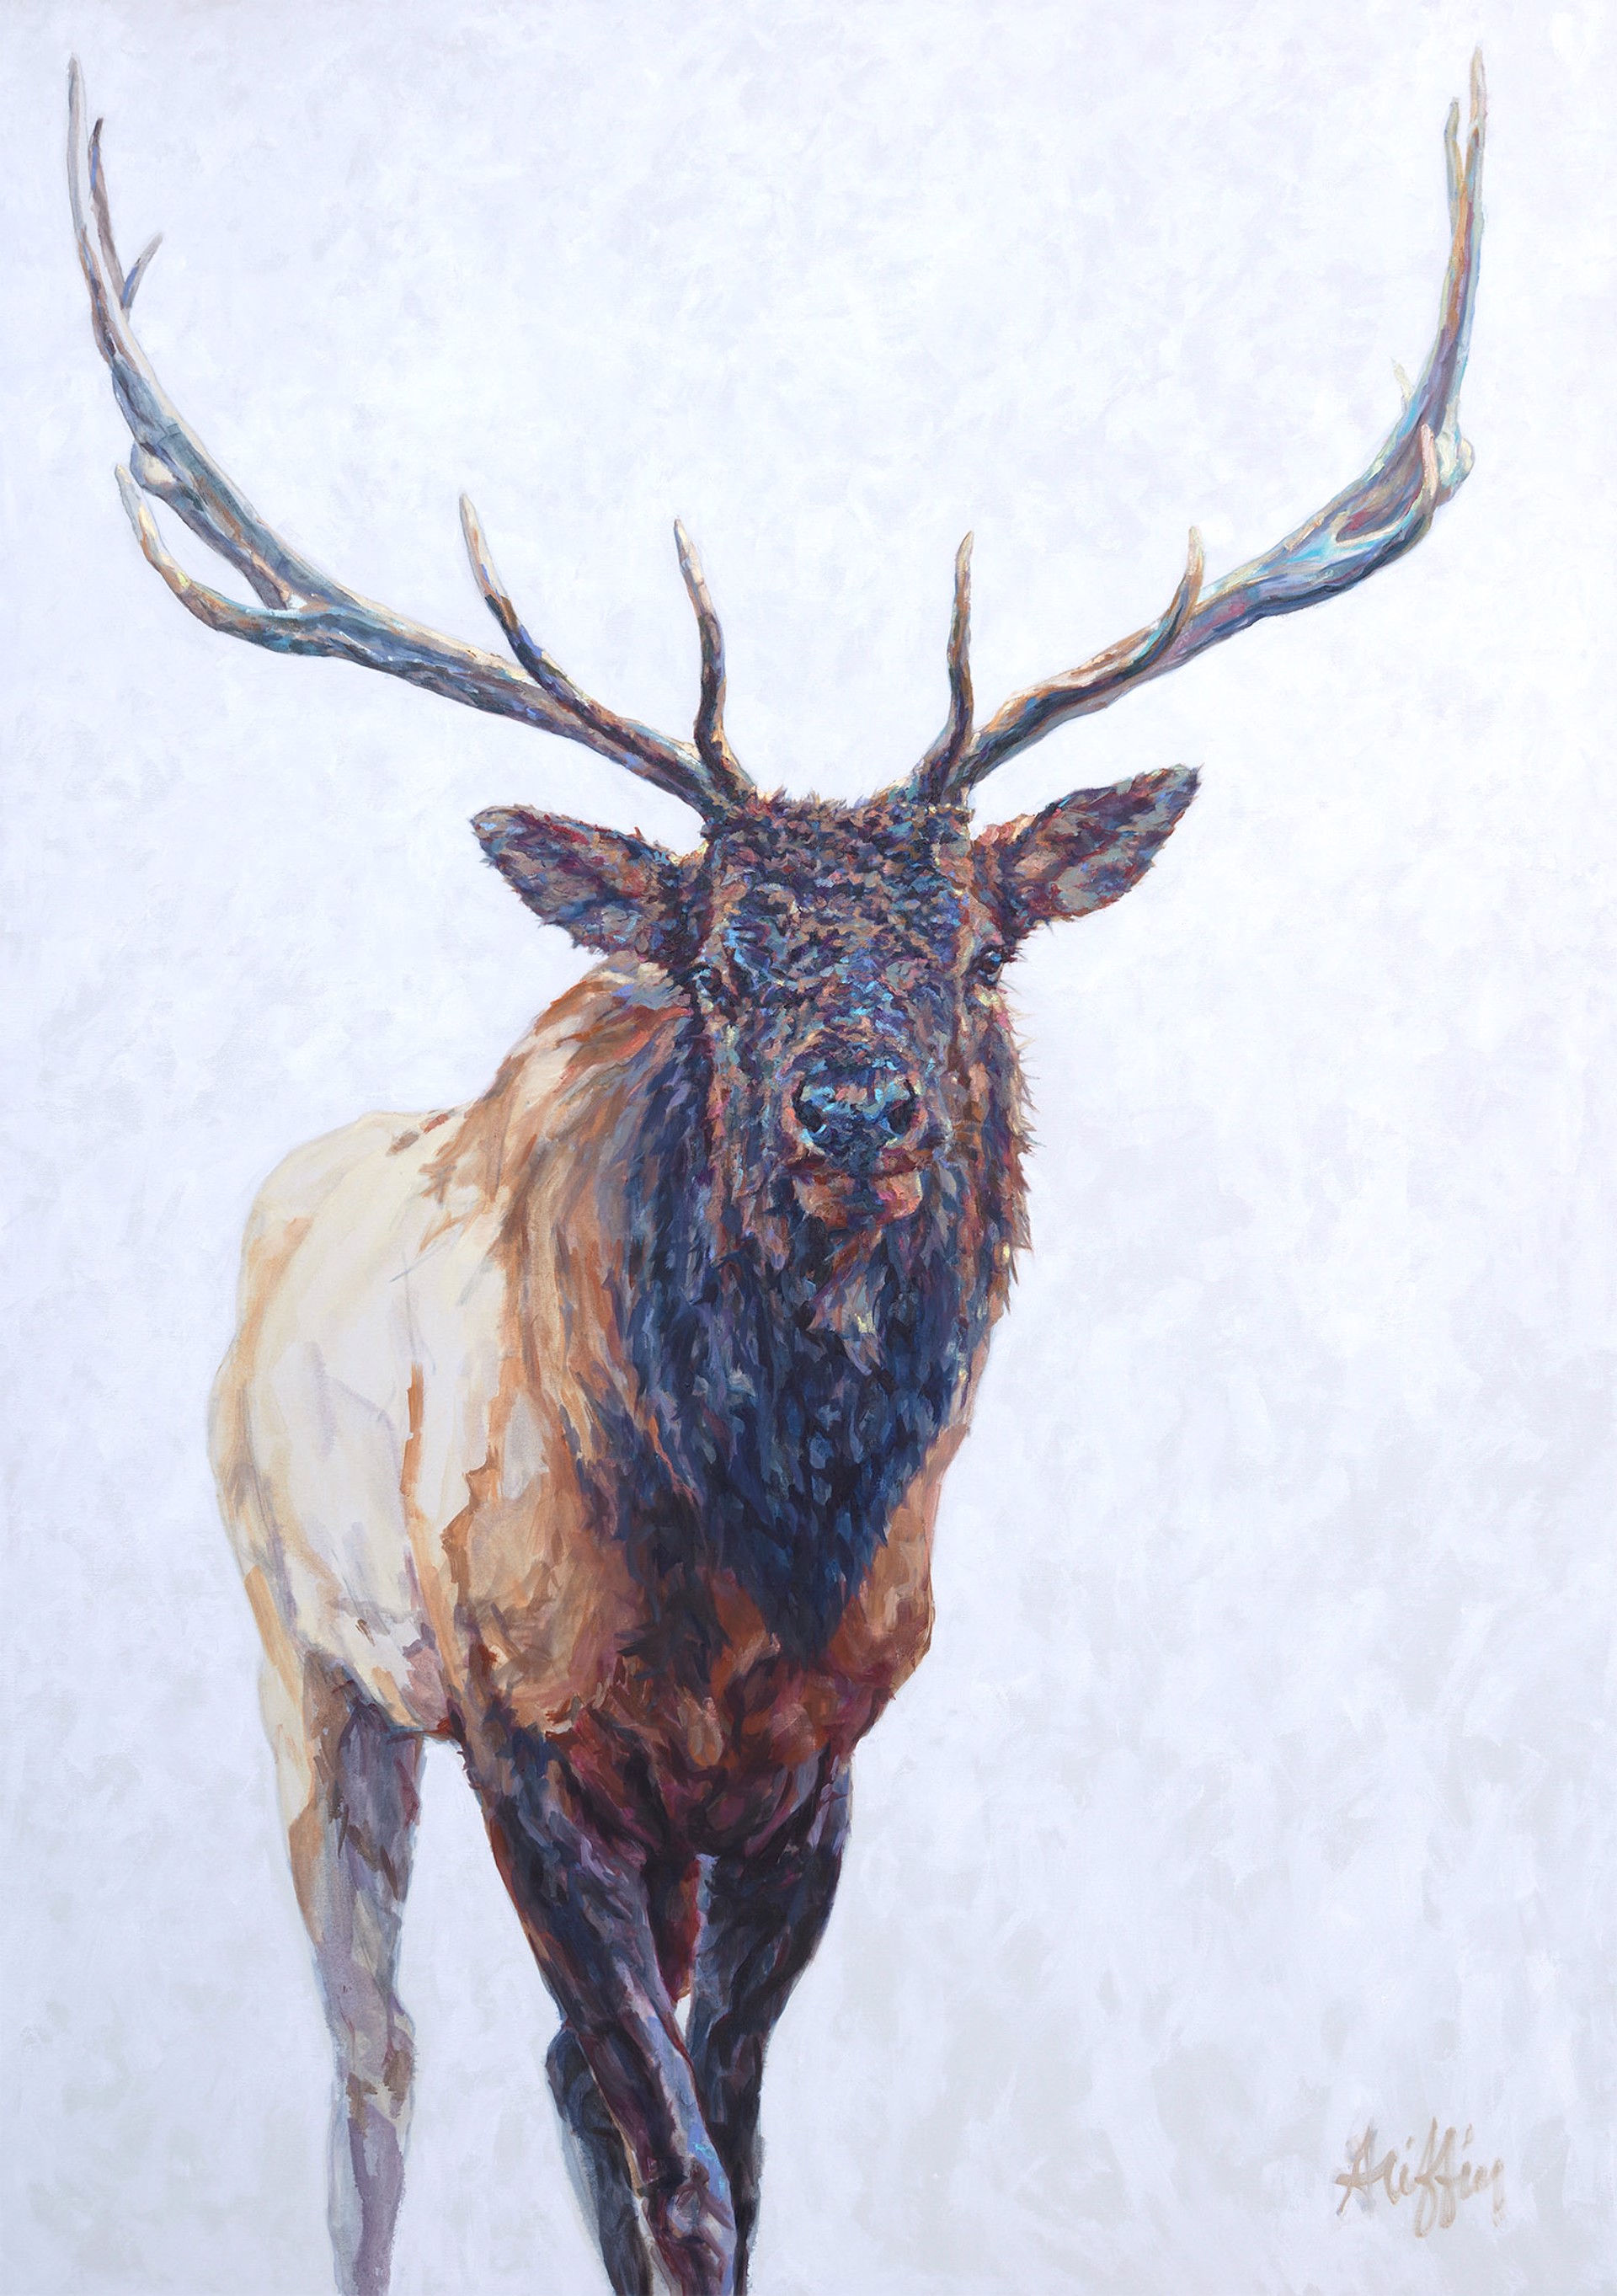 Original Oil Painting Featuring An Elk On White Background